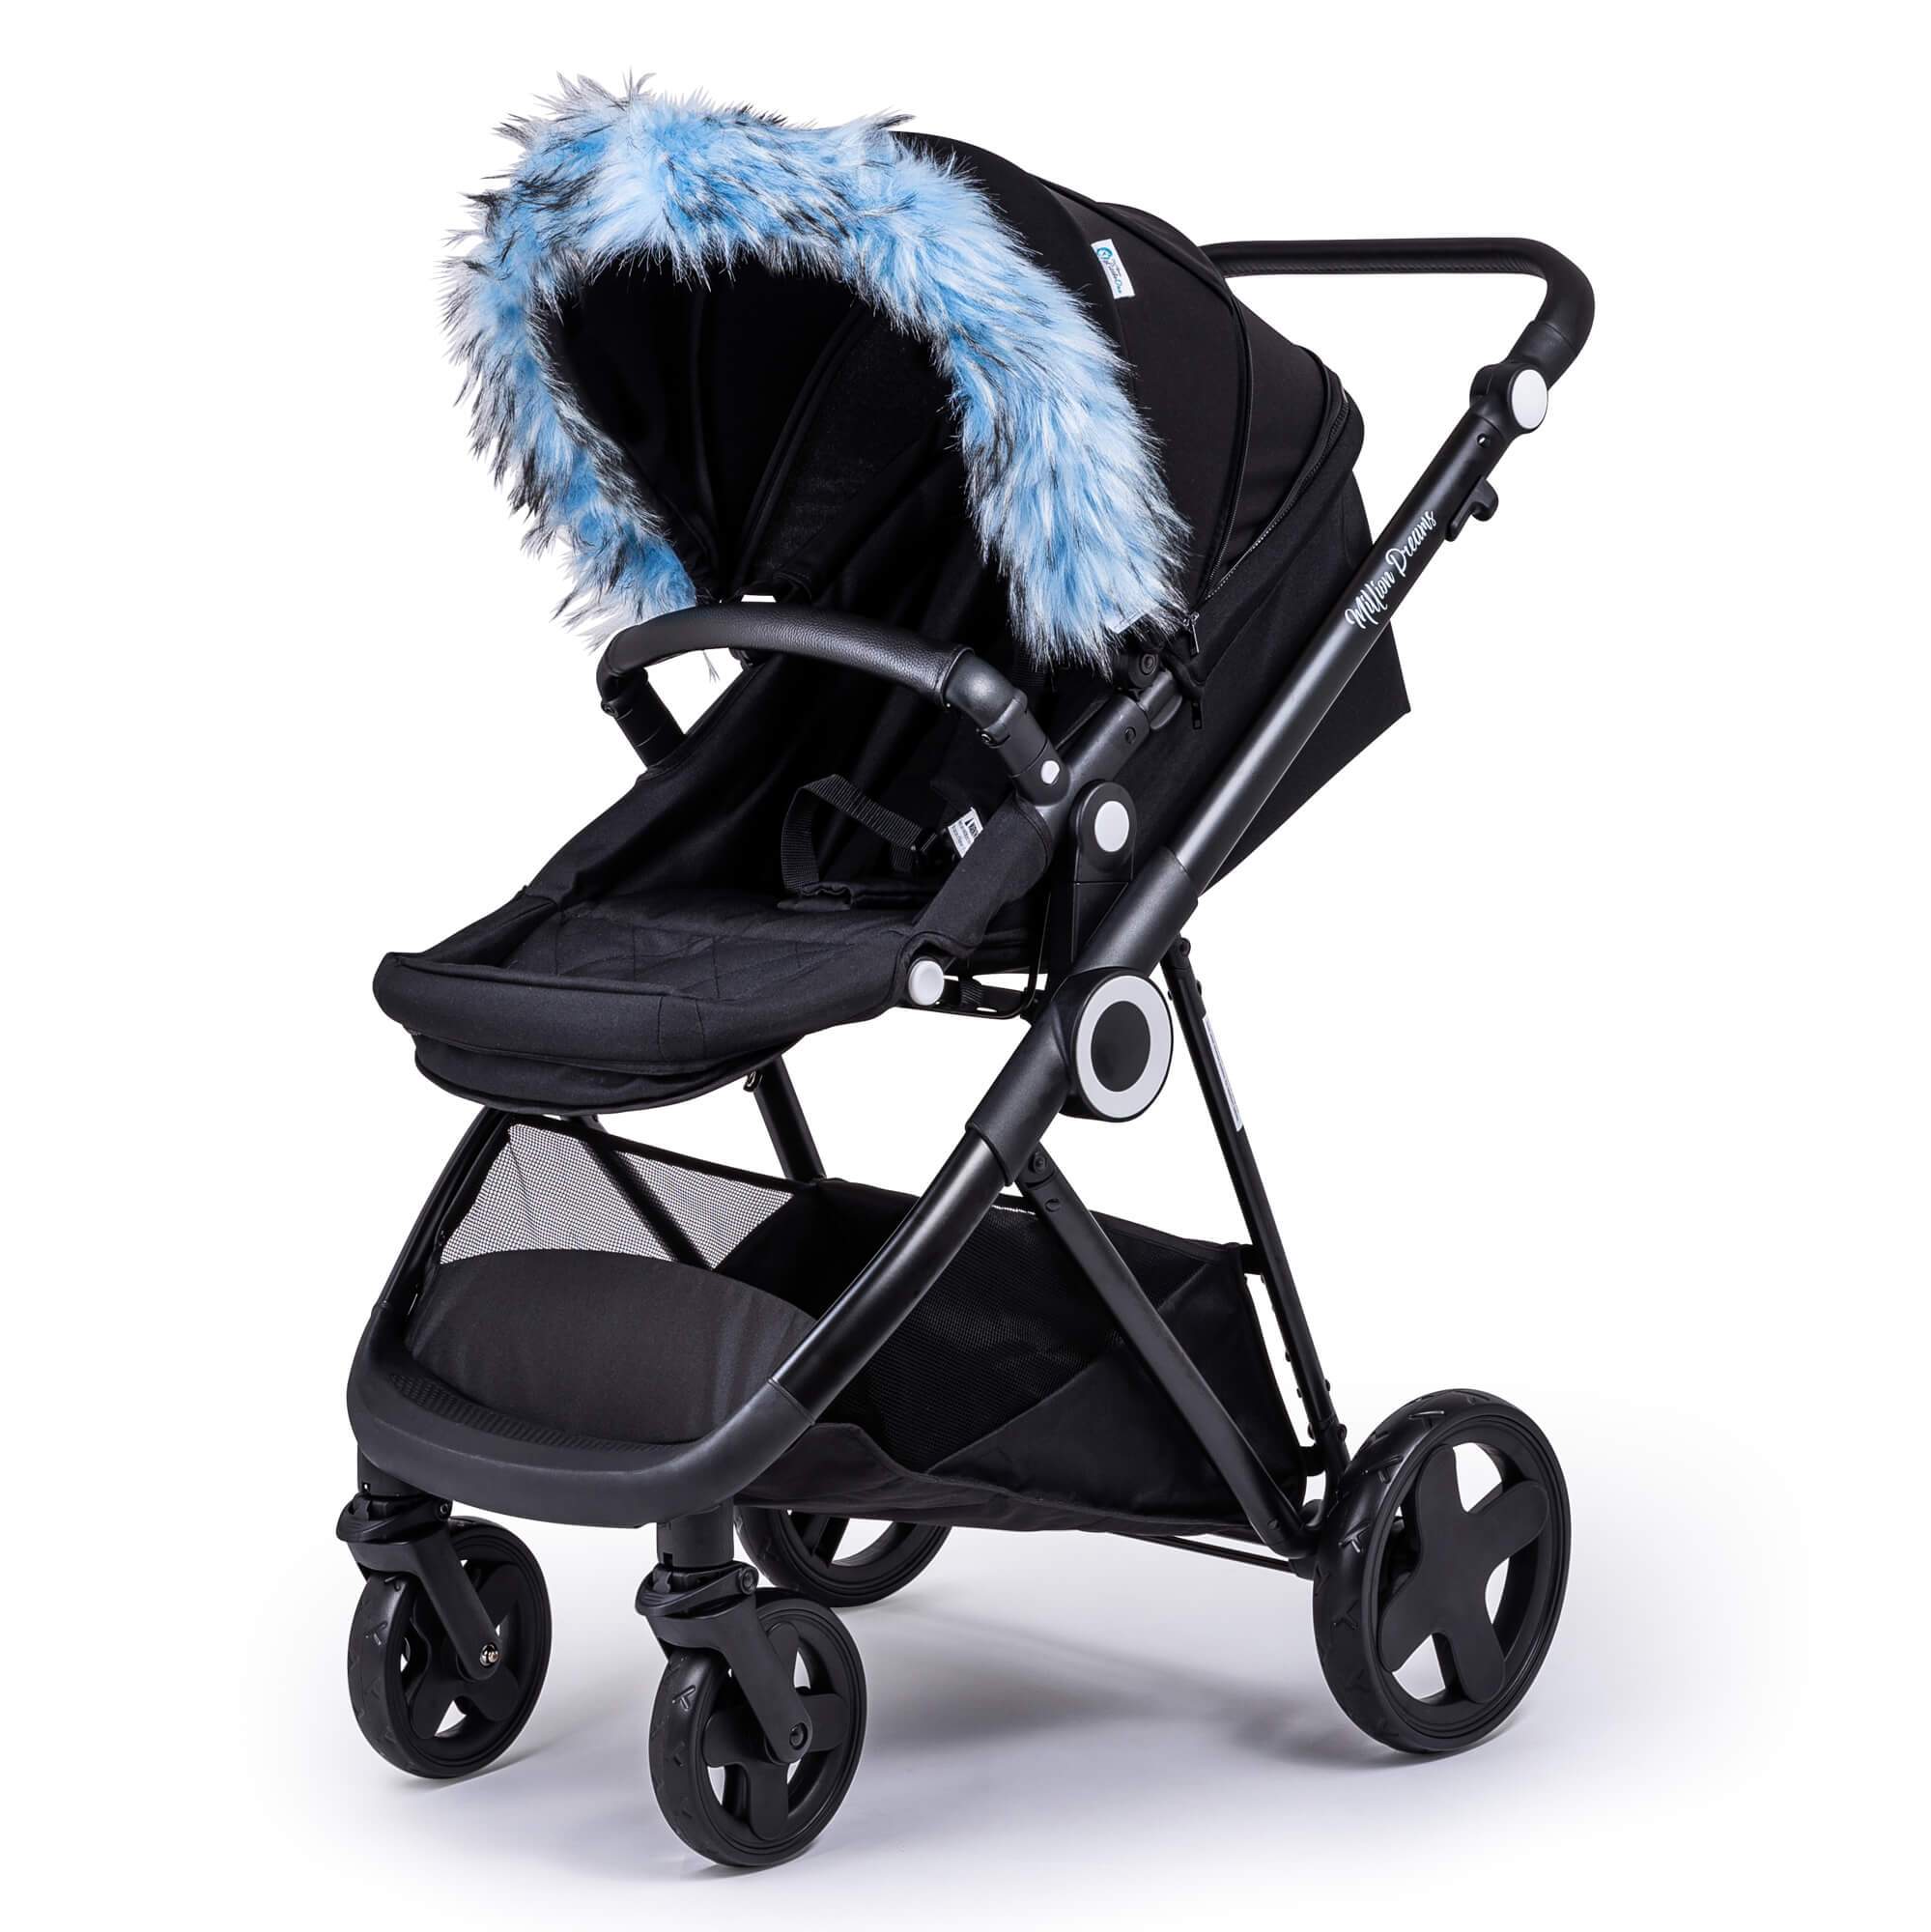 Pram Fur Hood Trim Attachment for Pushchair Compatible with Babyzen - Light Blue / Fits All Models | For Your Little One